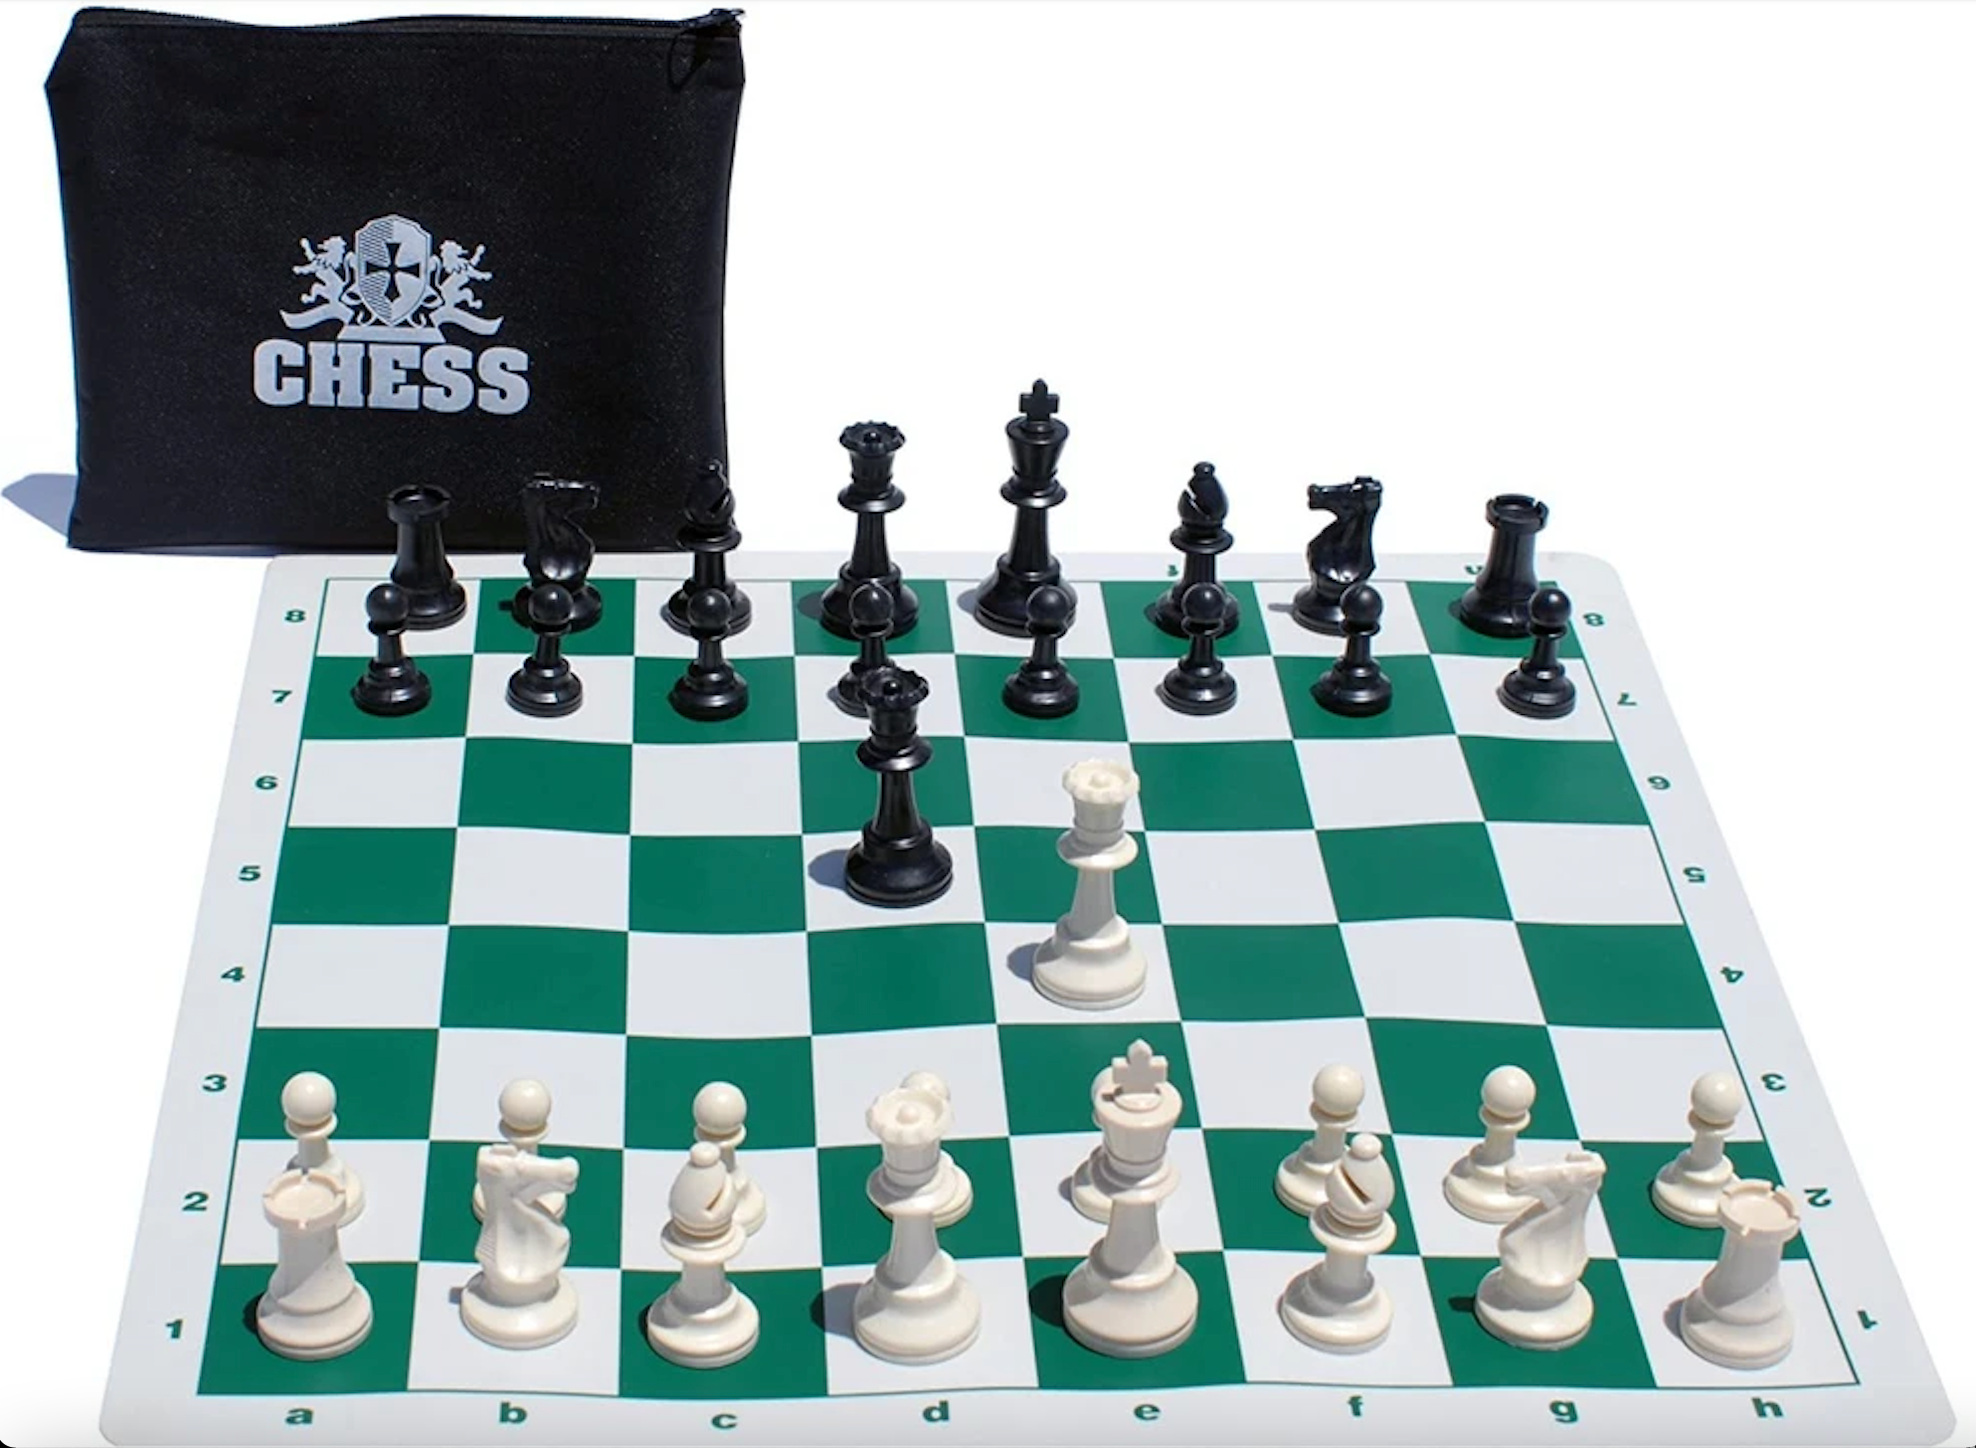 The Ultimate Chess Set